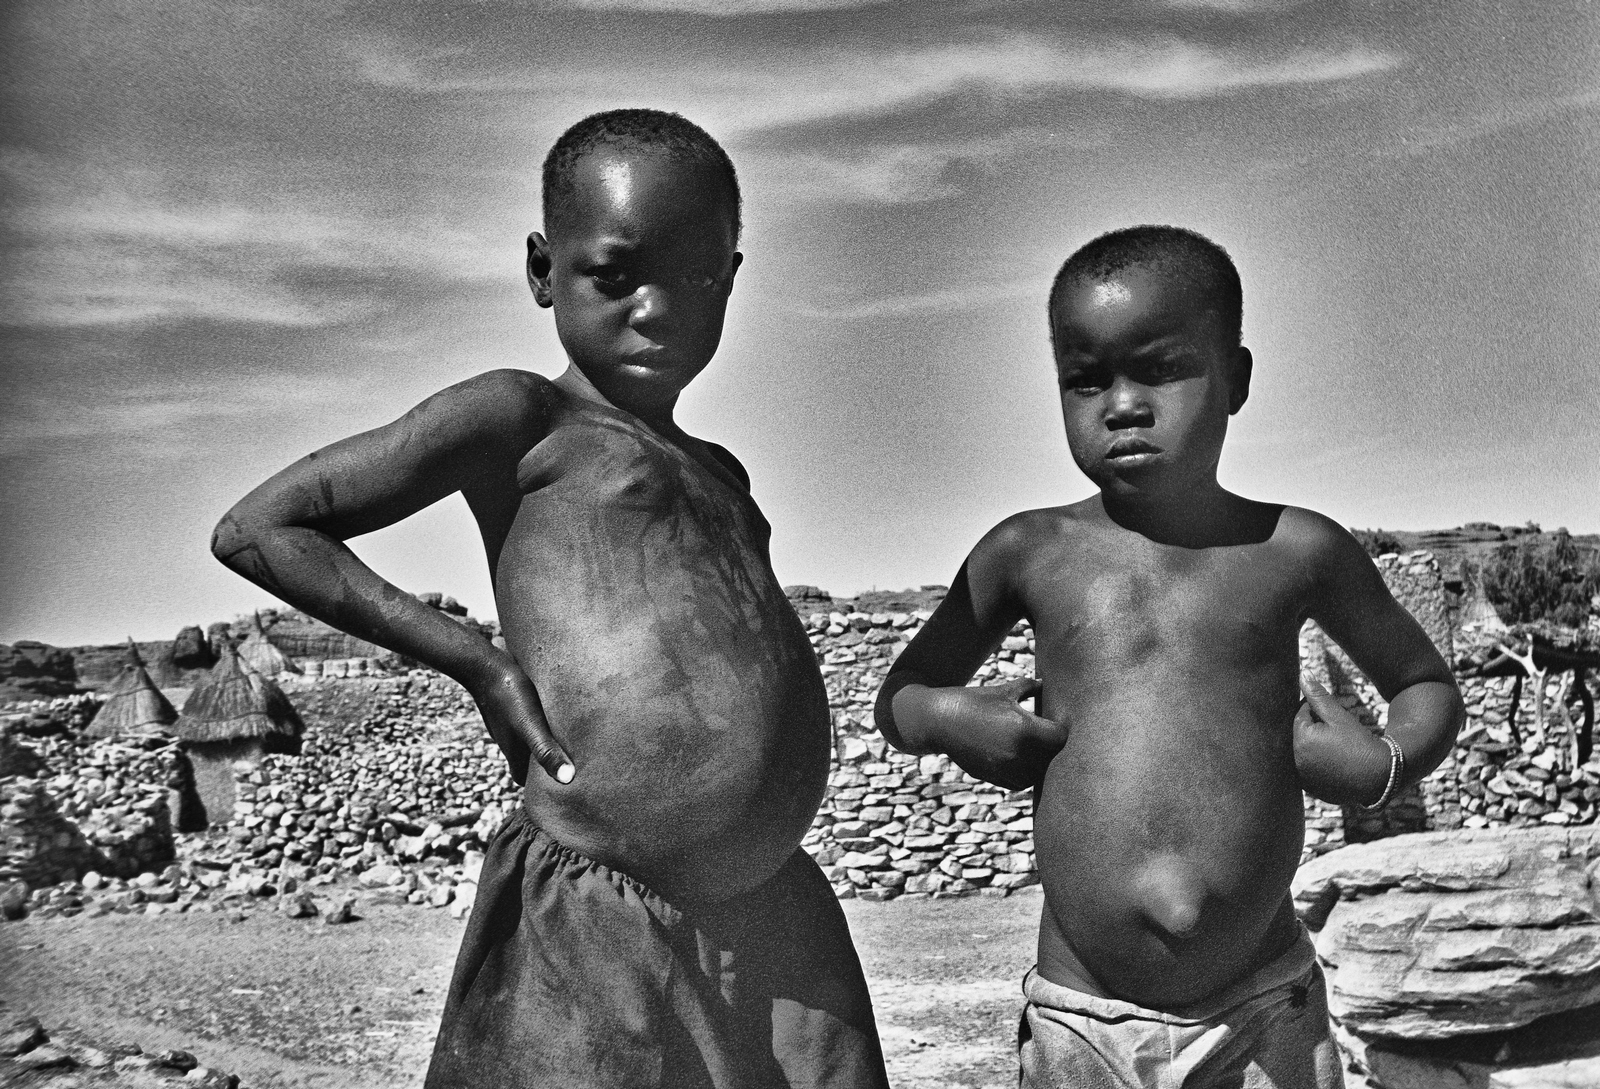 Some of the photos from my Mali trip in 1997